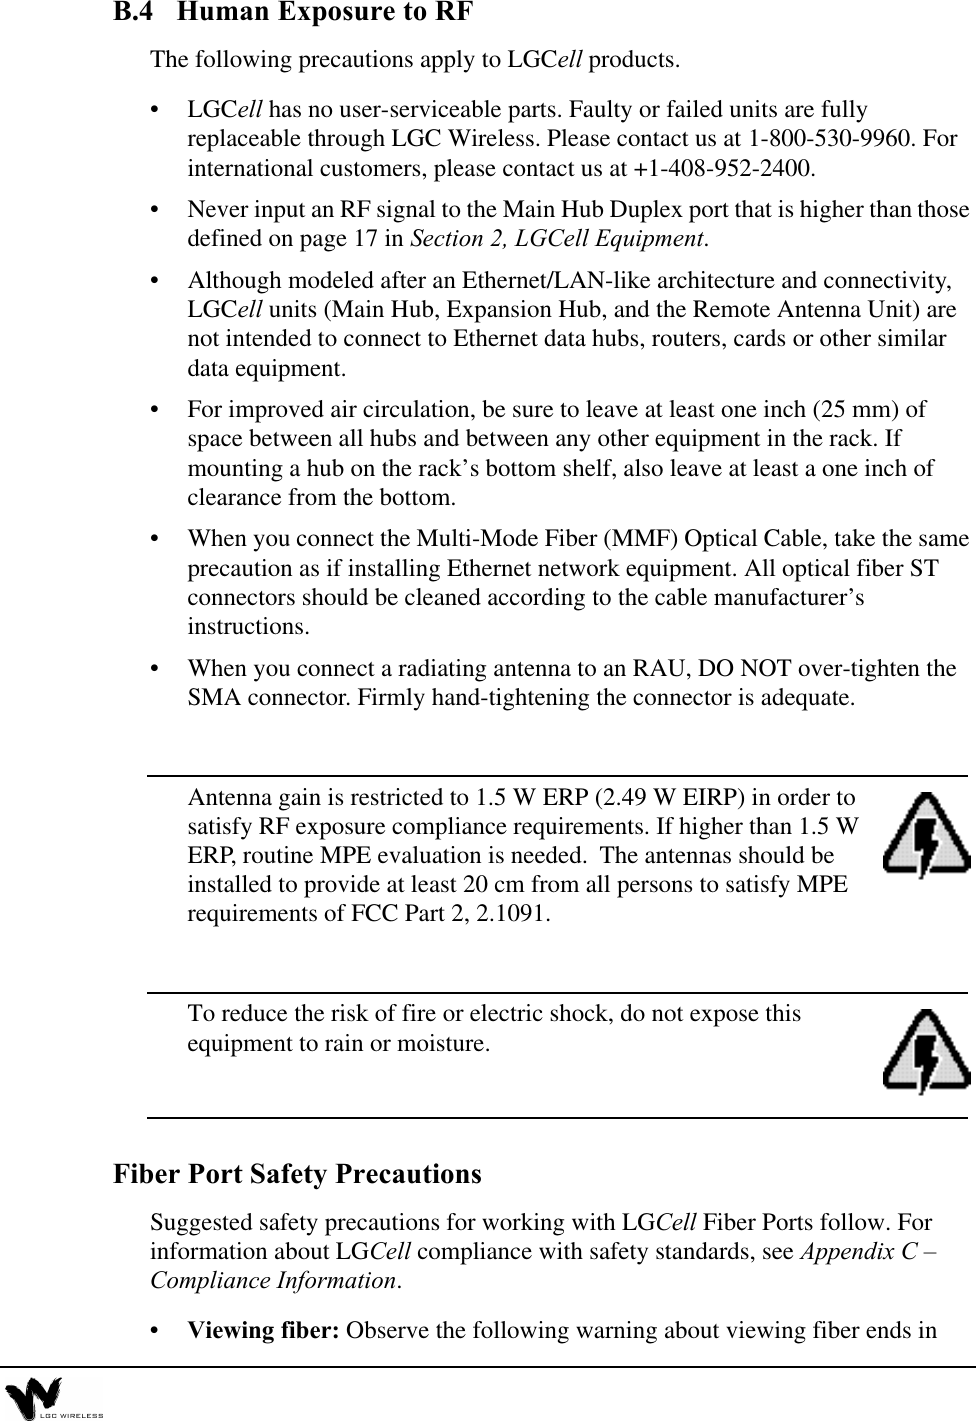 B.4   Human Exposure to RF      The following precautions apply to LGCell products.• LGCell has no user-serviceable parts. Faulty or failed units are fully replaceable through LGC Wireless. Please contact us at 1-800-530-9960. For international customers, please contact us at +1-408-952-2400.•Never input an RF signal to the Main Hub Duplex port that is higher than those defined on page17 in Section 2, LGCell Equipment.•Although modeled after an Ethernet/LAN-like architecture and connectivity, LGCell units (Main Hub, Expansion Hub, and the Remote Antenna Unit) are not intended to connect to Ethernet data hubs, routers, cards or other similar data equipment.•For improved air circulation, be sure to leave at least one inch (25 mm) of space between all hubs and between any other equipment in the rack. If mounting a hub on the rack’s bottom shelf, also leave at least a one inch of clearance from the bottom.•When you connect the Multi-Mode Fiber (MMF) Optical Cable, take the same precaution as if installing Ethernet network equipment. All optical fiber ST connectors should be cleaned according to the cable manufacturer’s instructions.•When you connect a radiating antenna to an RAU, DO NOT over-tighten the SMA connector. Firmly hand-tightening the connector is adequate.Antenna gain is restricted to 1.5 W ERP (2.49 W EIRP) in order to satisfy RF exposure compliance requirements. If higher than 1.5 W ERP, routine MPE evaluation is needed.  The antennas should be installed to provide at least 20 cm from all persons to satisfy MPE requirements of FCC Part 2, 2.1091. To reduce the risk of fire or electric shock, do not expose this equipment to rain or moisture.Fiber Port Safety PrecautionsSuggested safety precautions for working with LGCell Fiber Ports follow. For information about LGCell compliance with safety standards, see Appendix C – Compliance Information.•Viewing fiber: Observe the following warning about viewing fiber ends in 